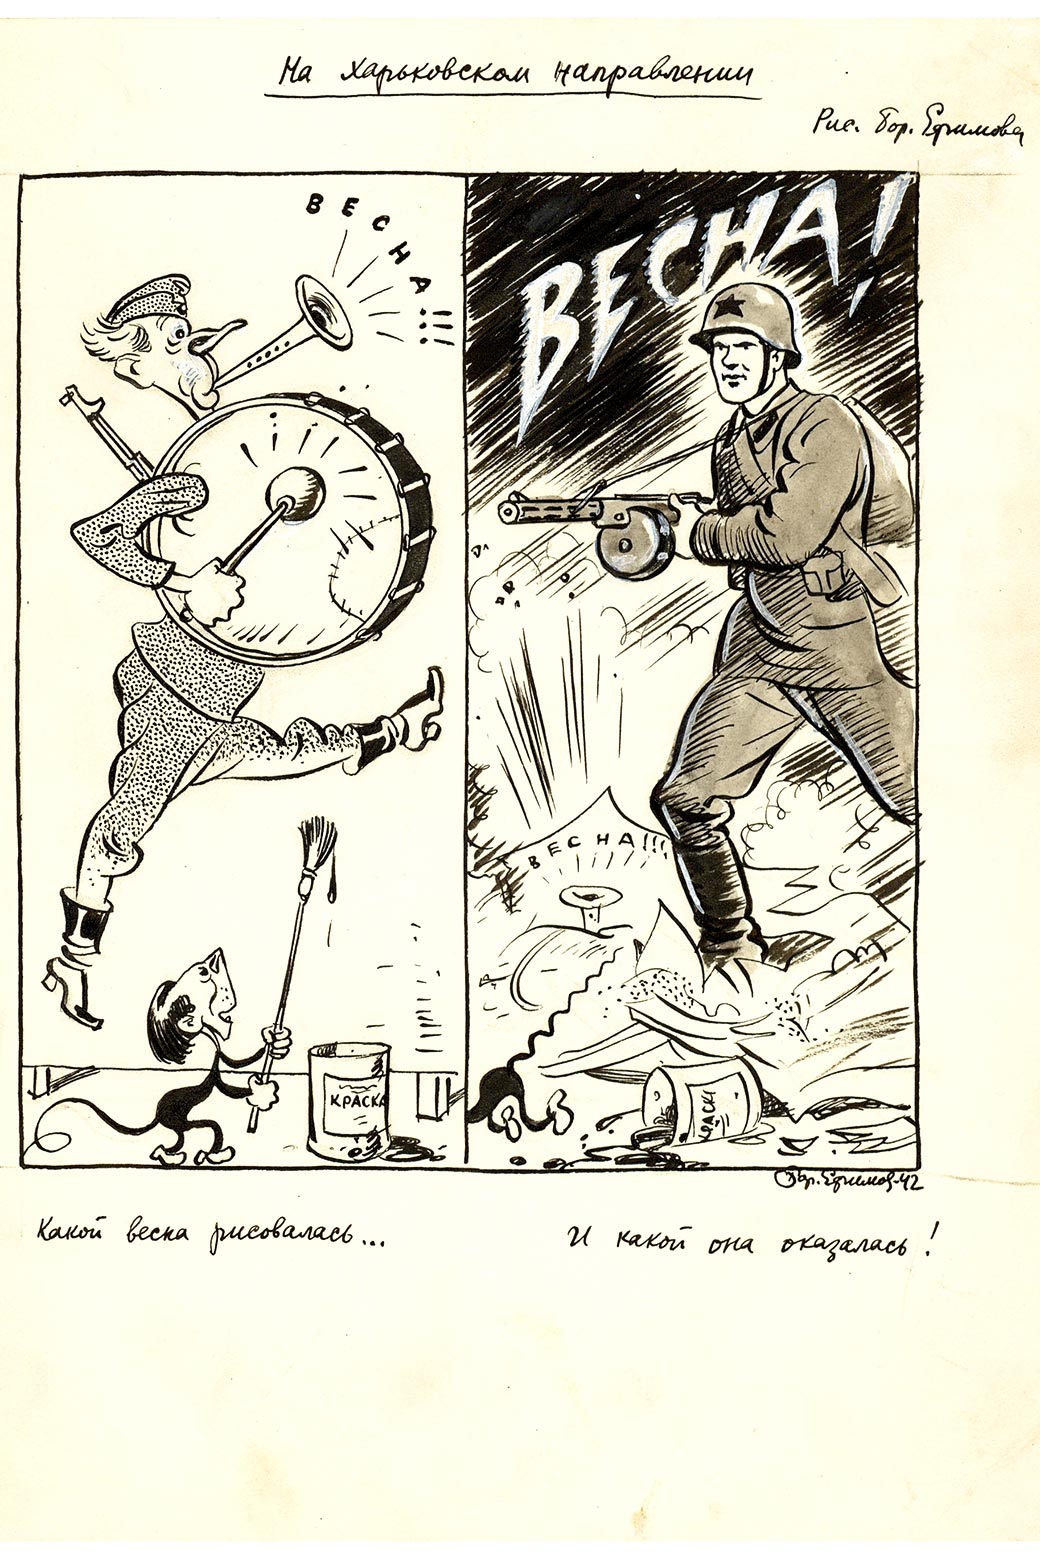 A cartoon with two panels, the left showing a marching-band member playing instruments and walking, the right showing a soldier aiming a rifle